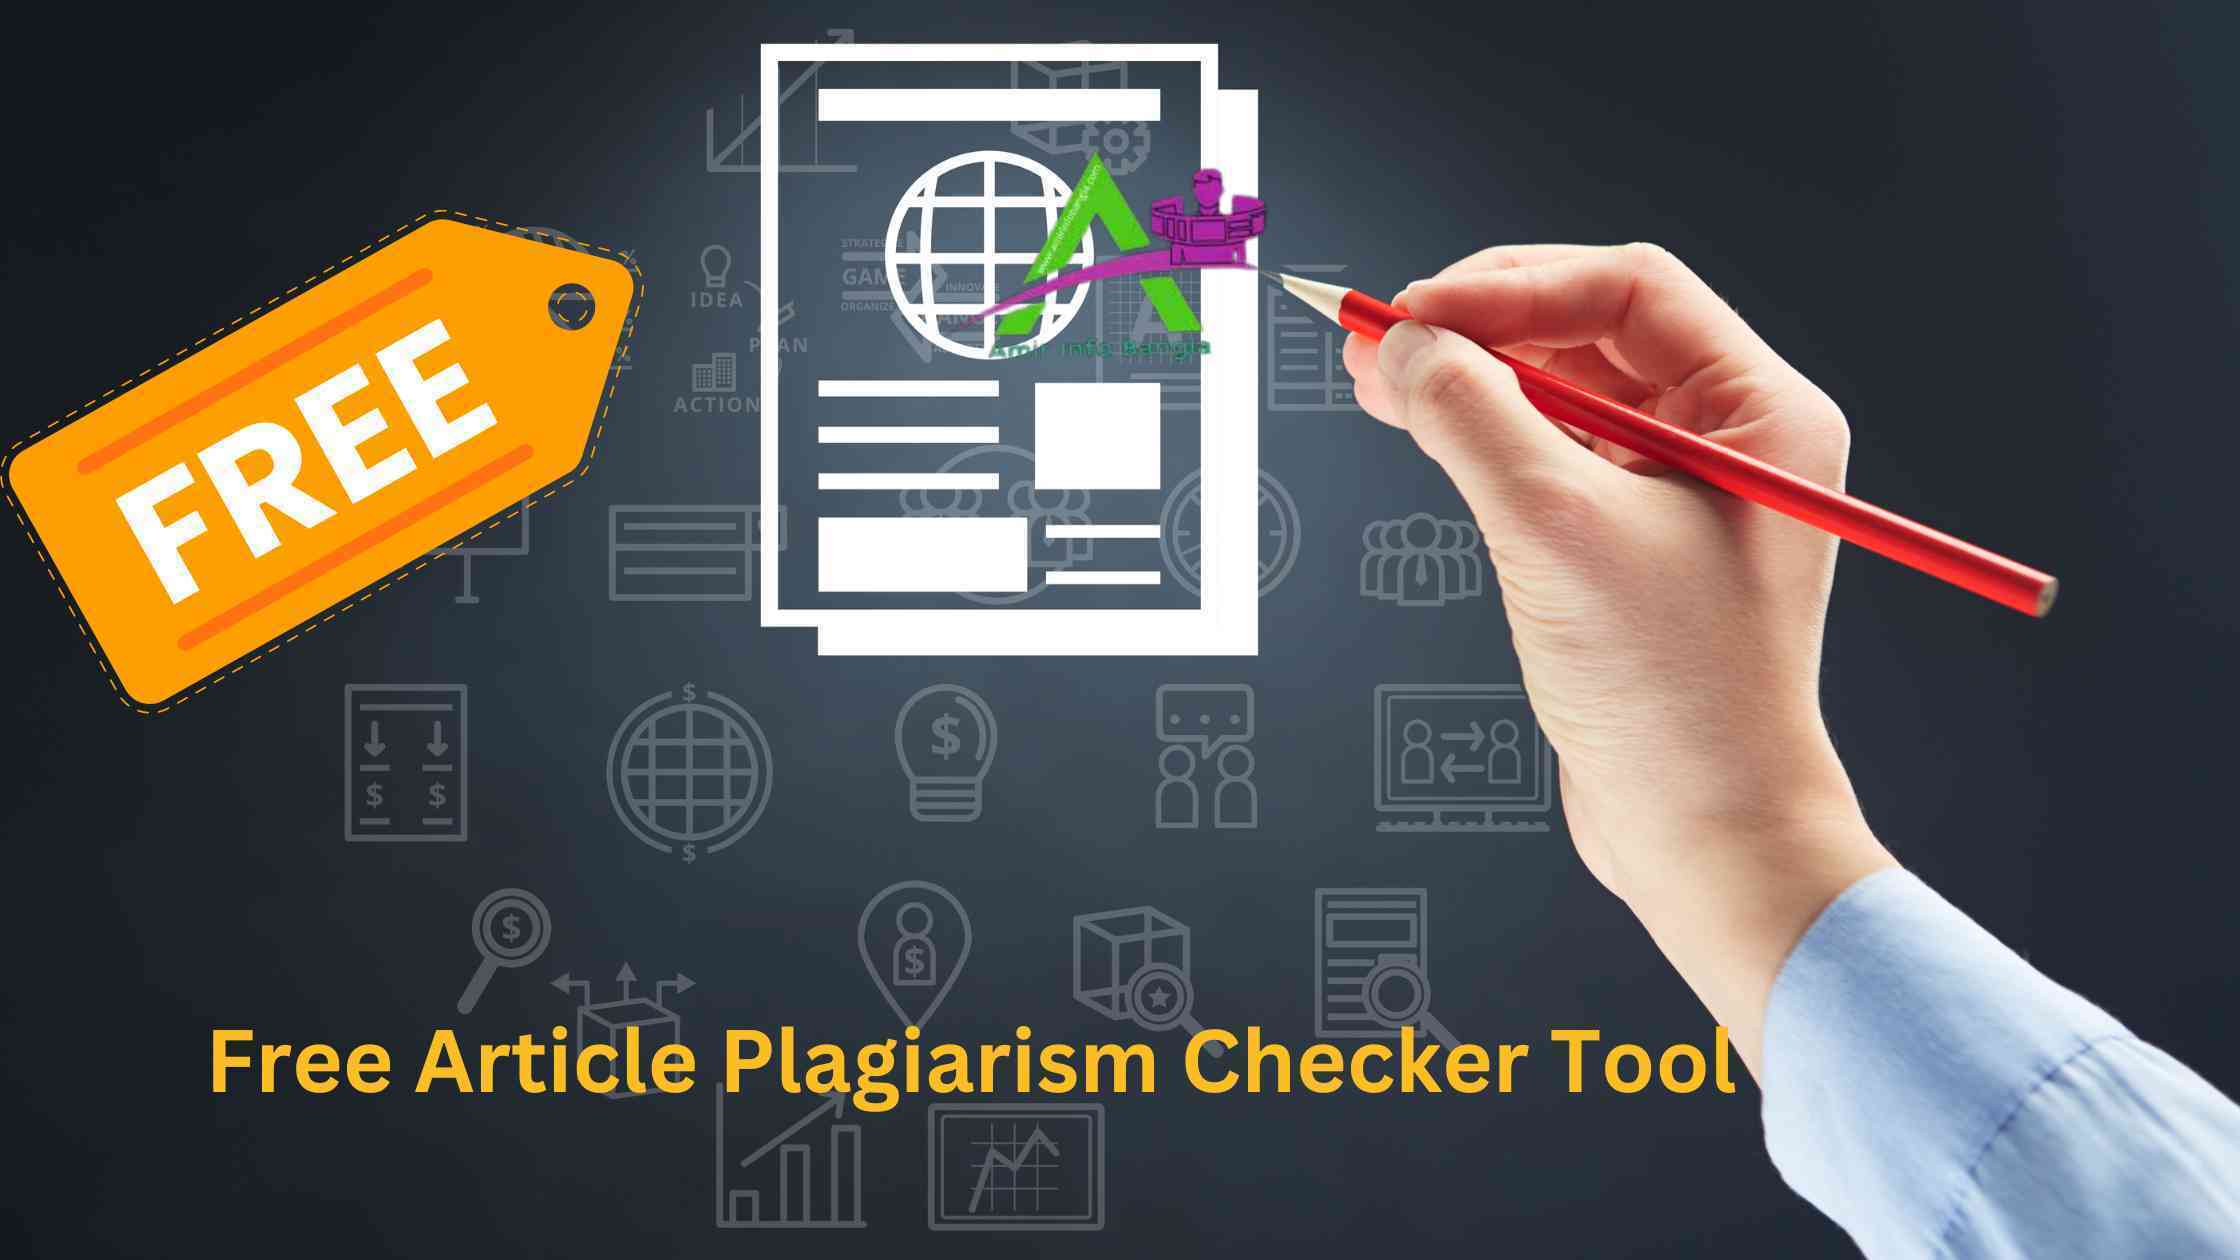 Free Article Plagiarism Checker Tool